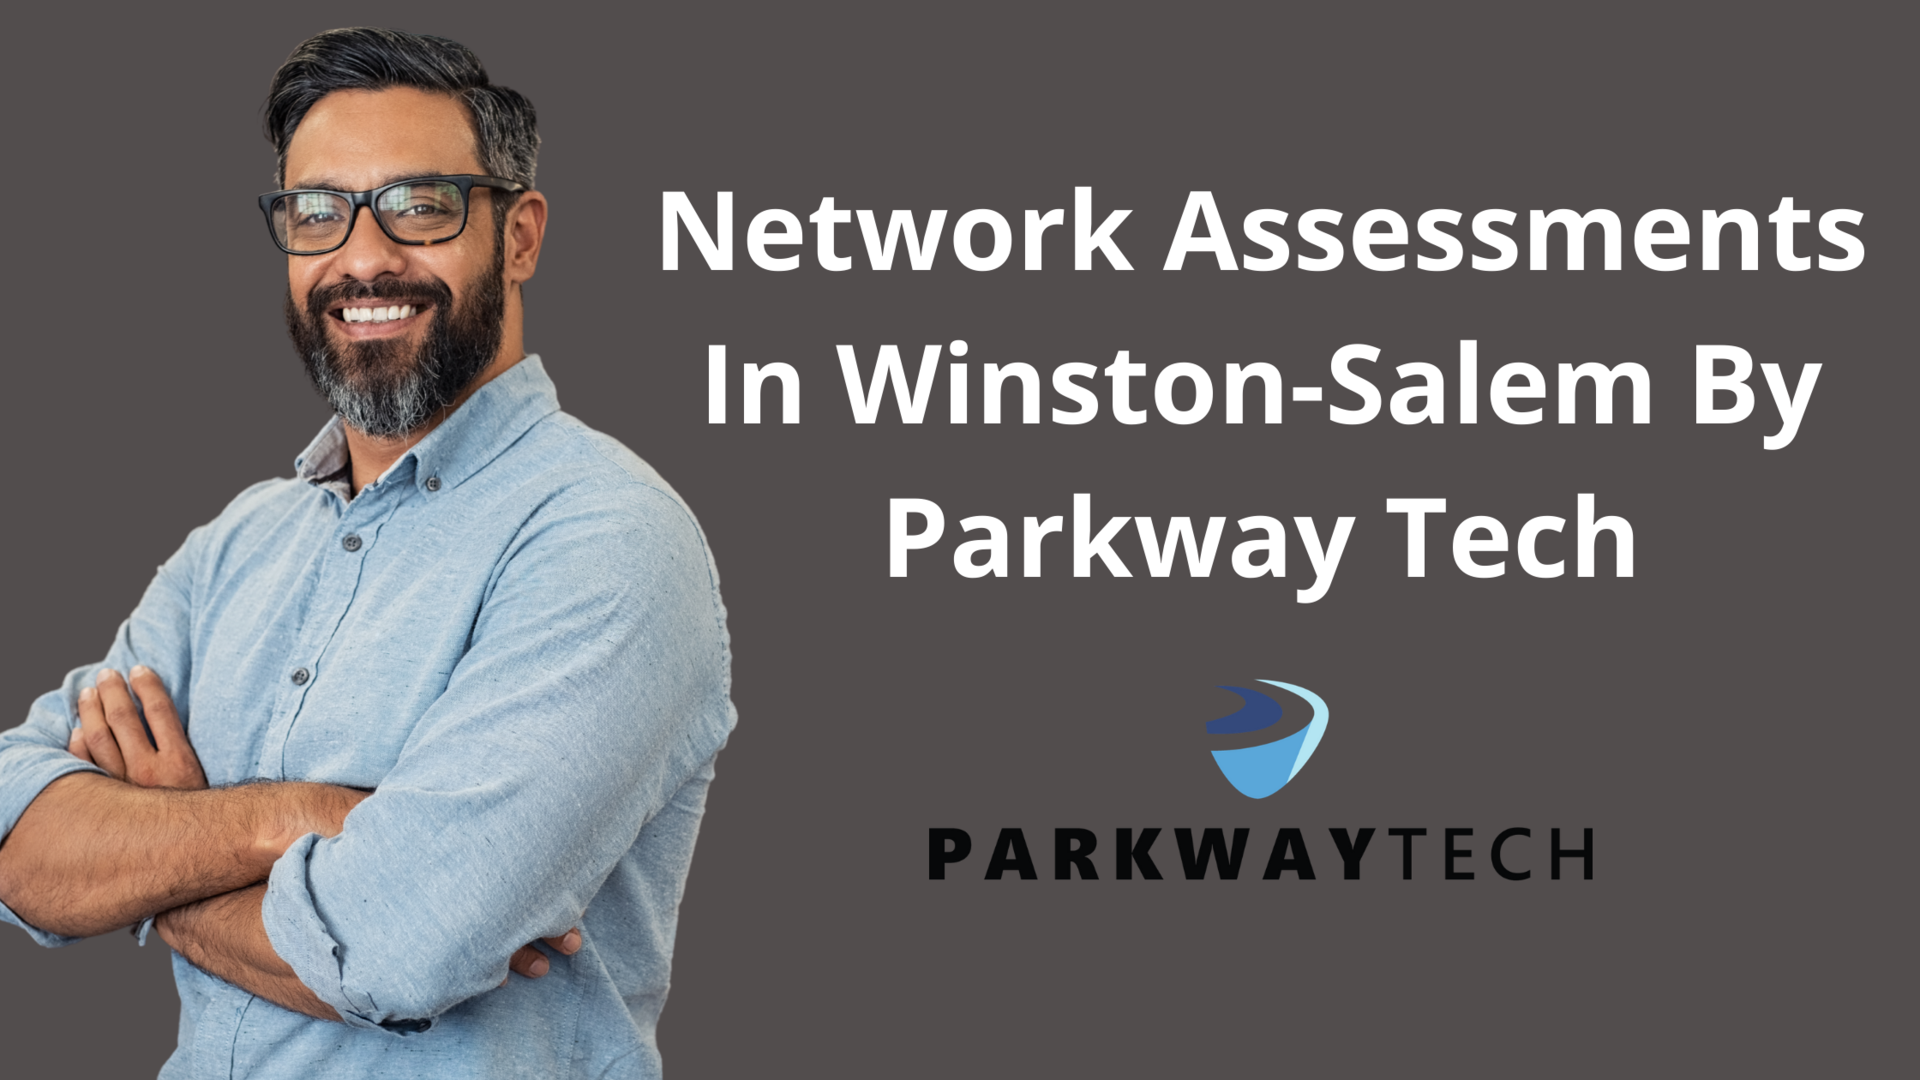 Network Assessments In Winston-Salem By Parkway Tech